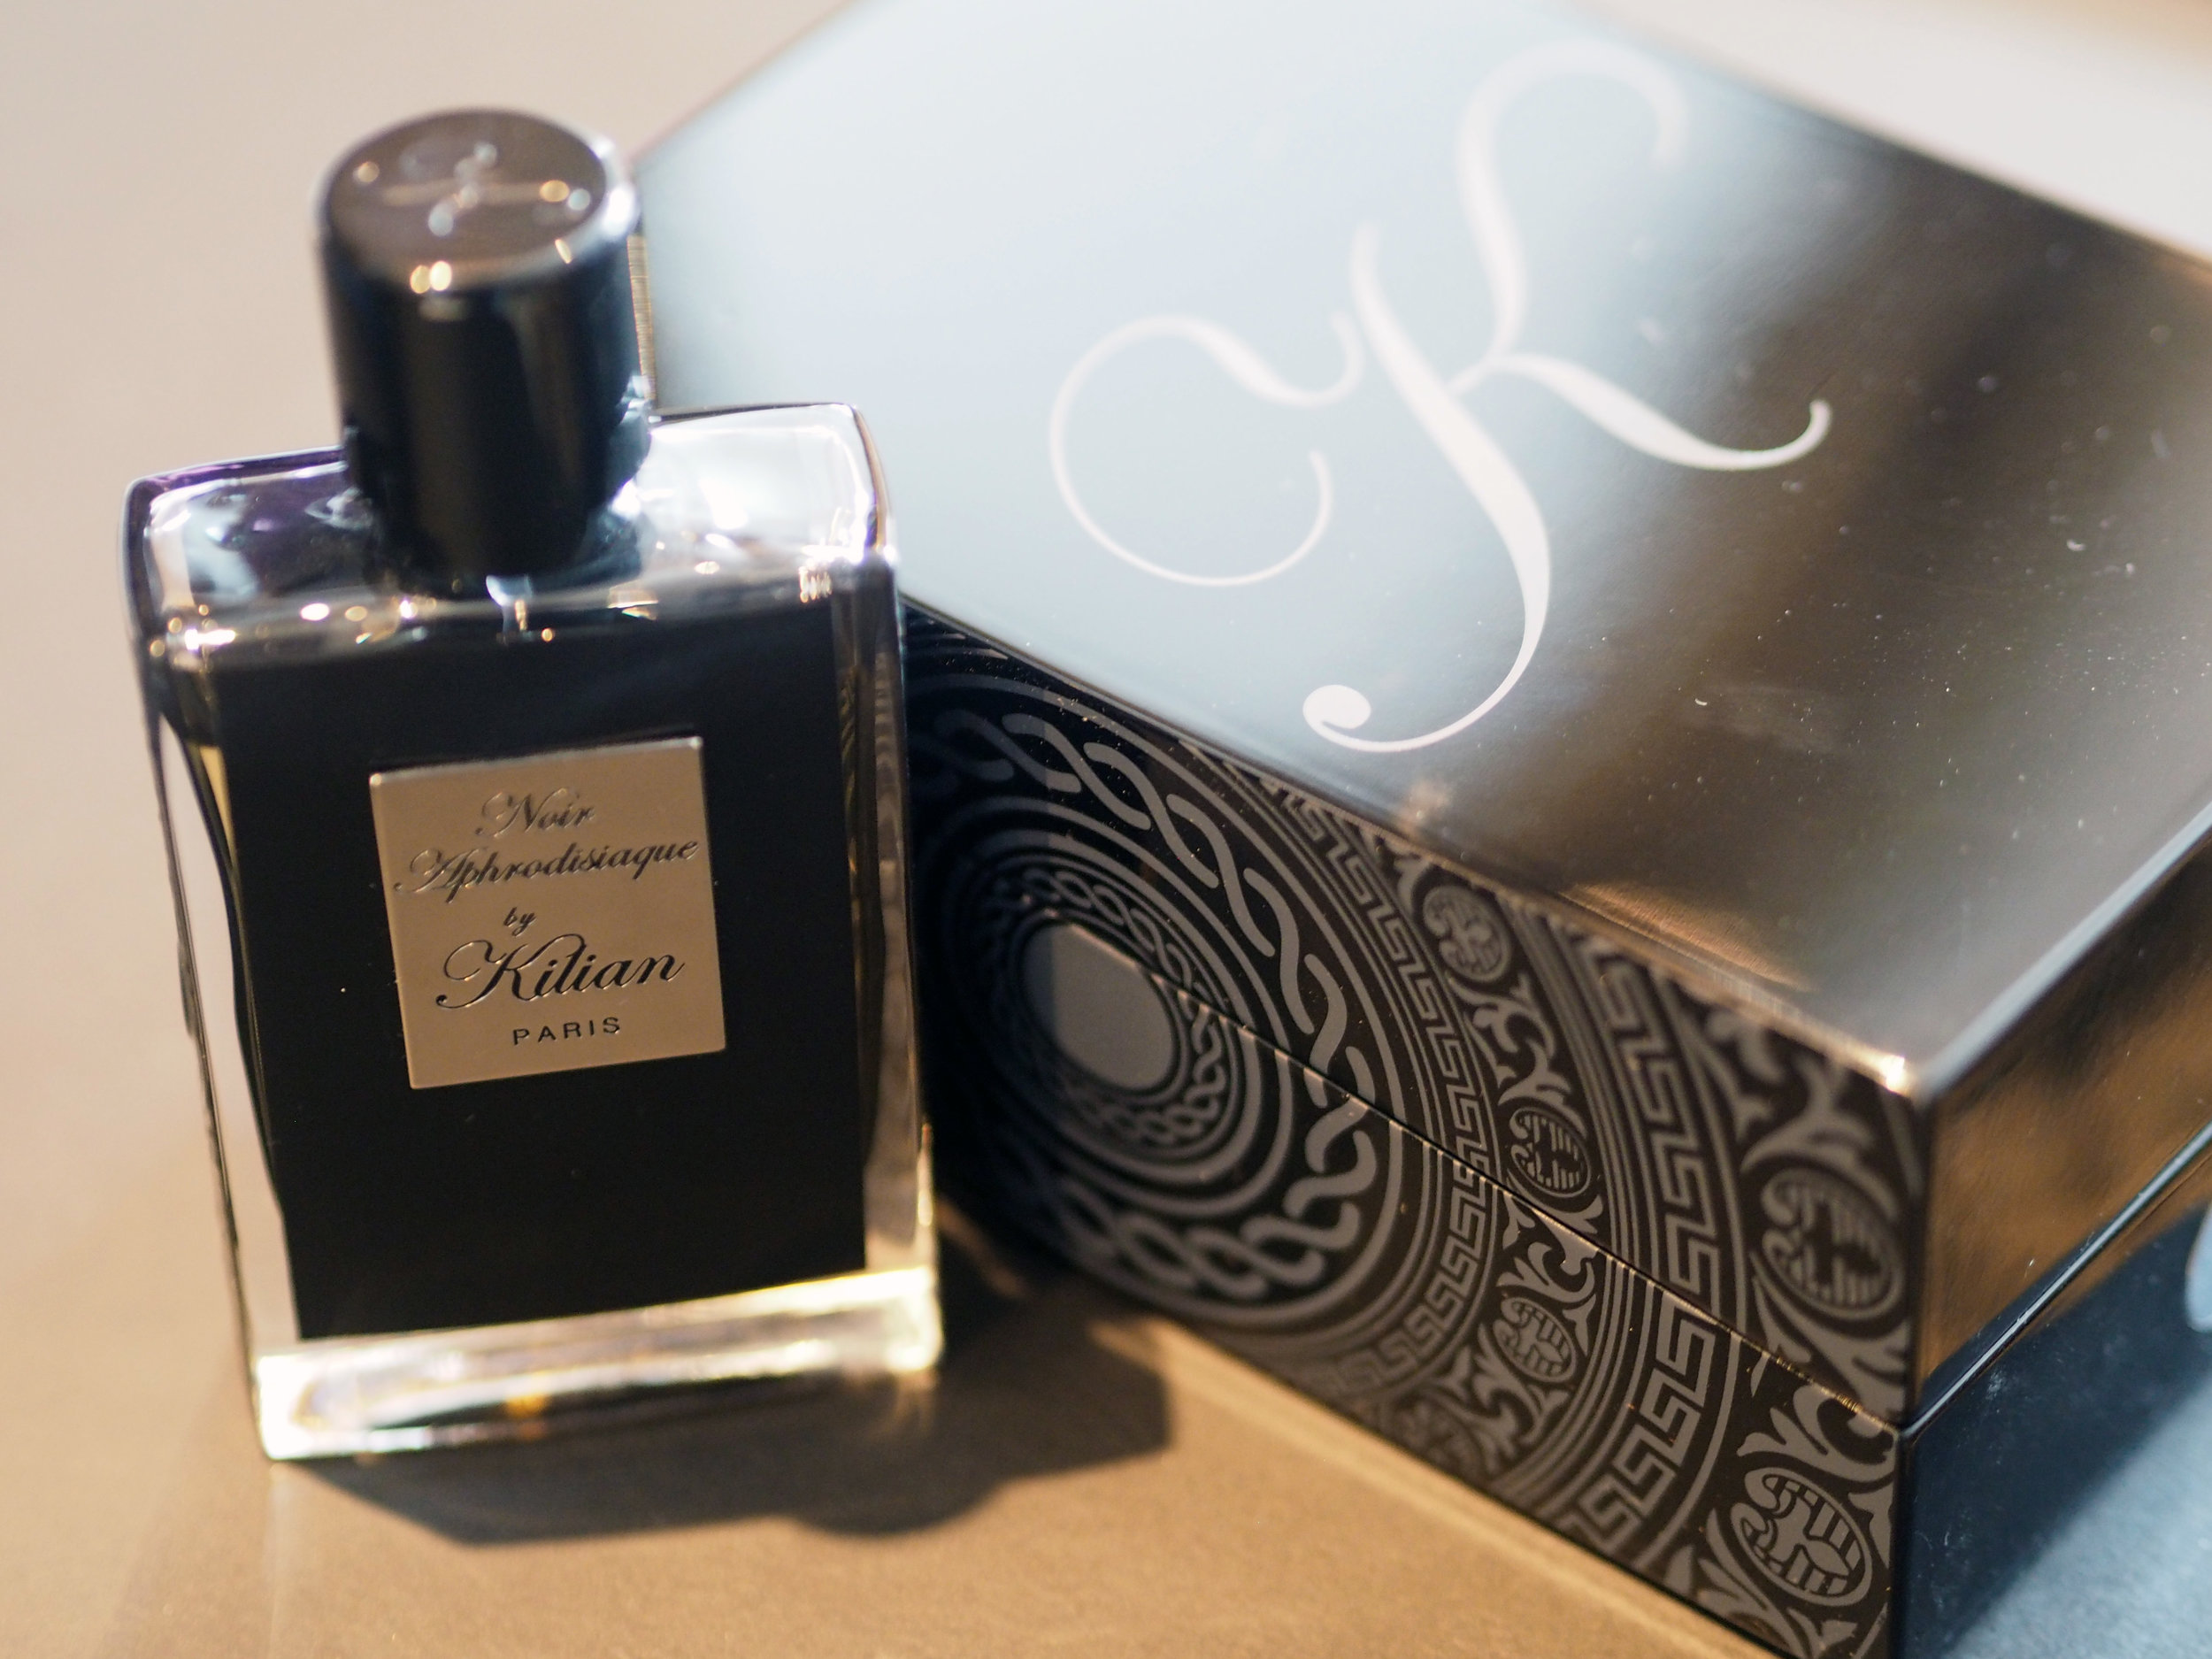 Moving on to the two Kilian fragrances that have been in my collection for ...